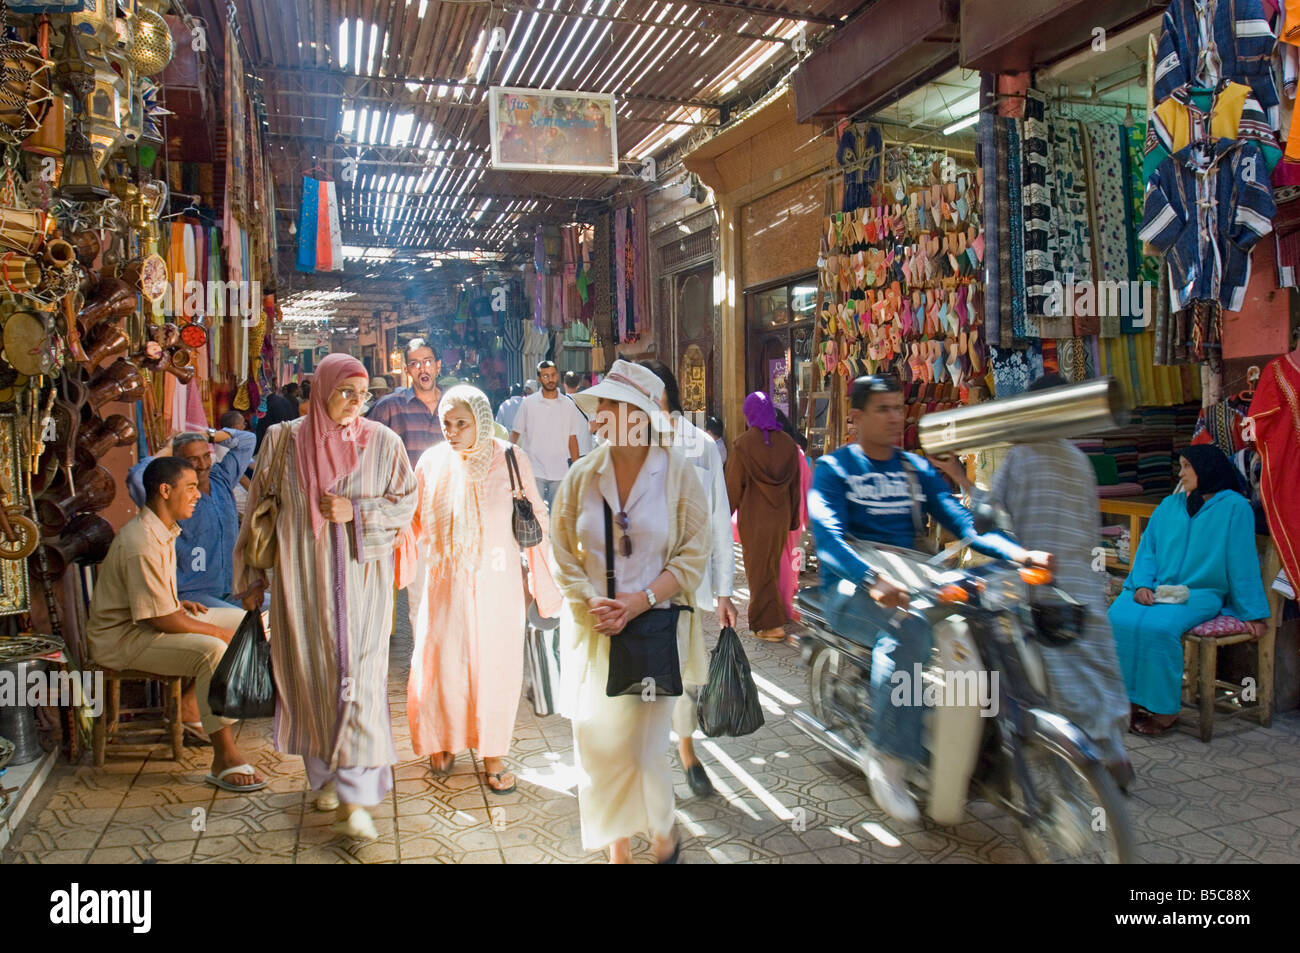 A view of people shopping in the narrow streets of the souk area in Marrakesh. Stock Photo